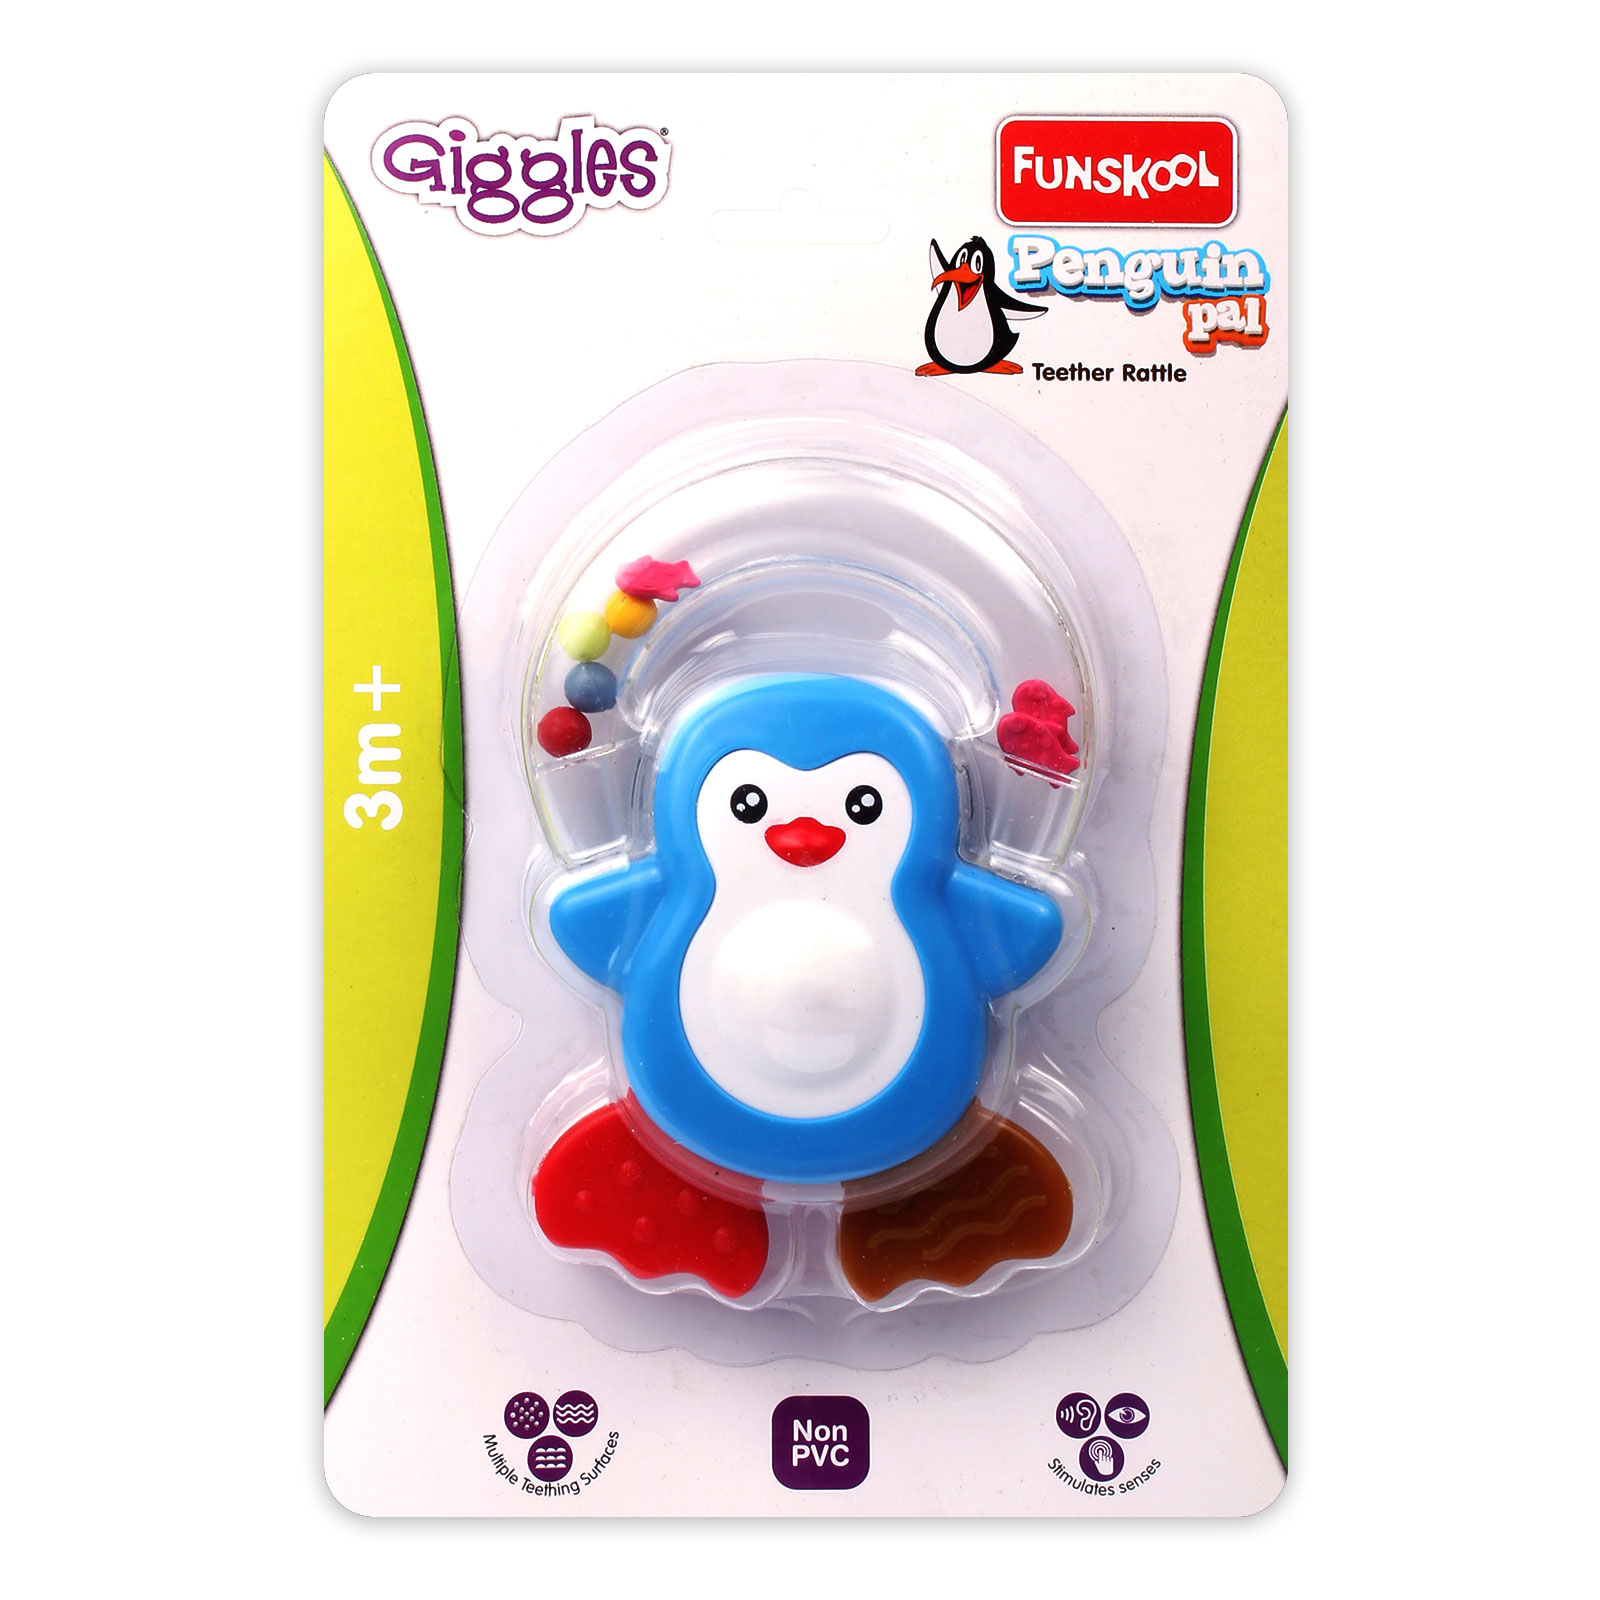 Penguin Pal Teether Rattle